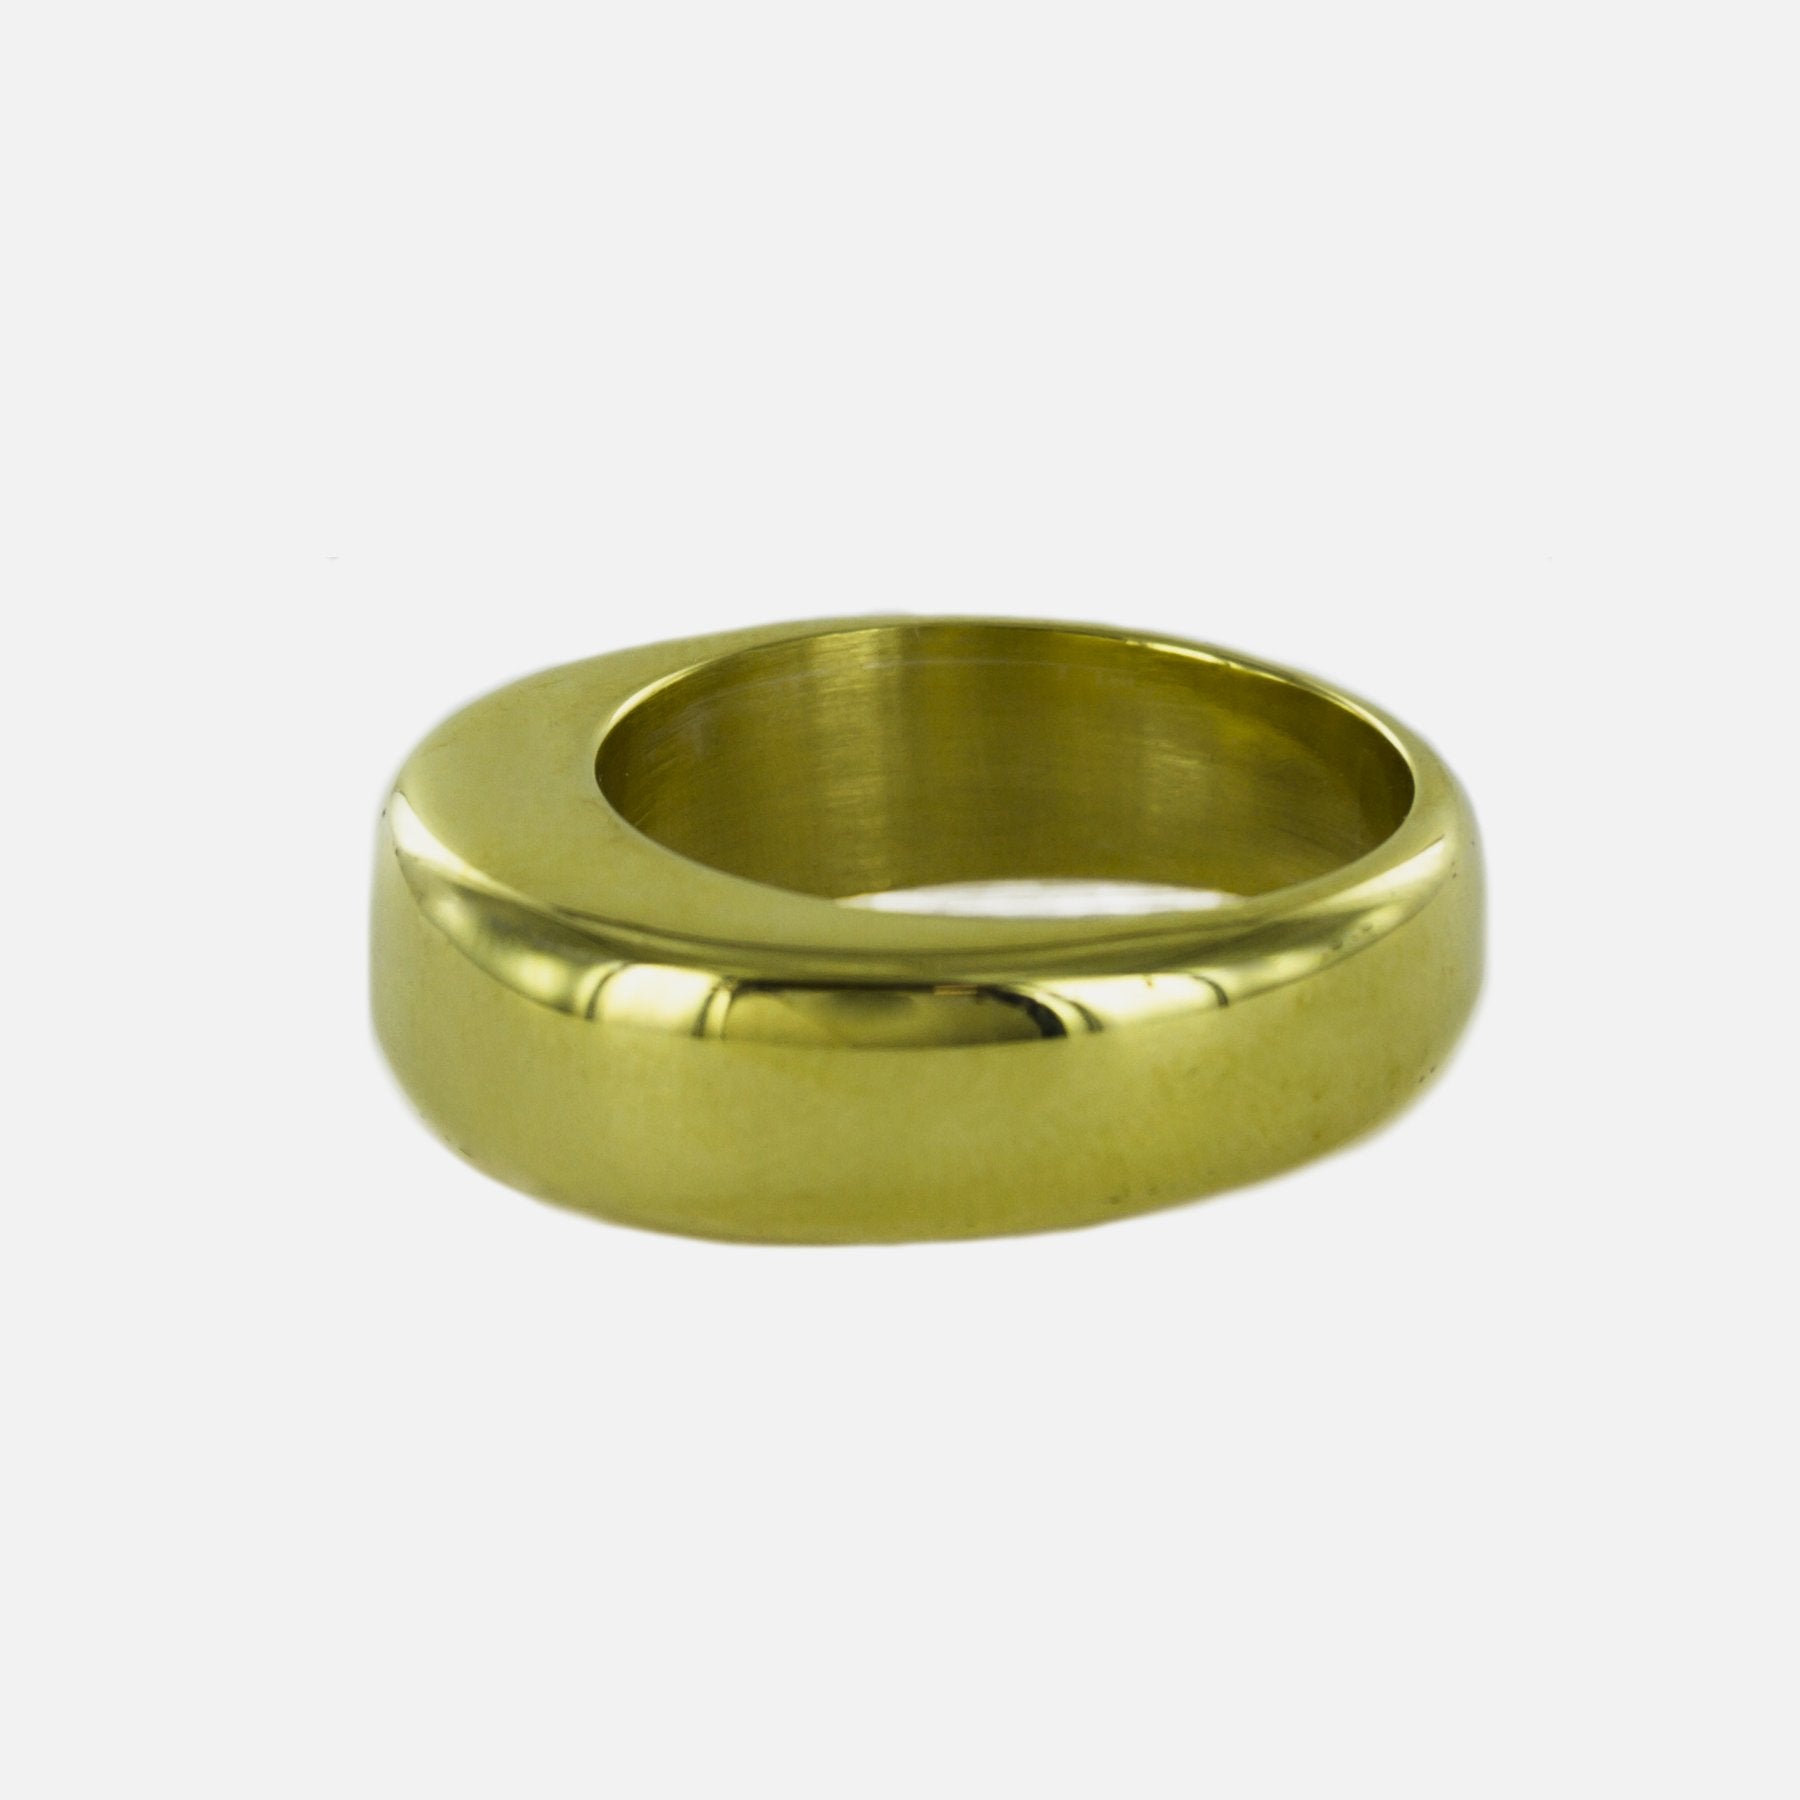 Hollow Brass Ring - Size 6